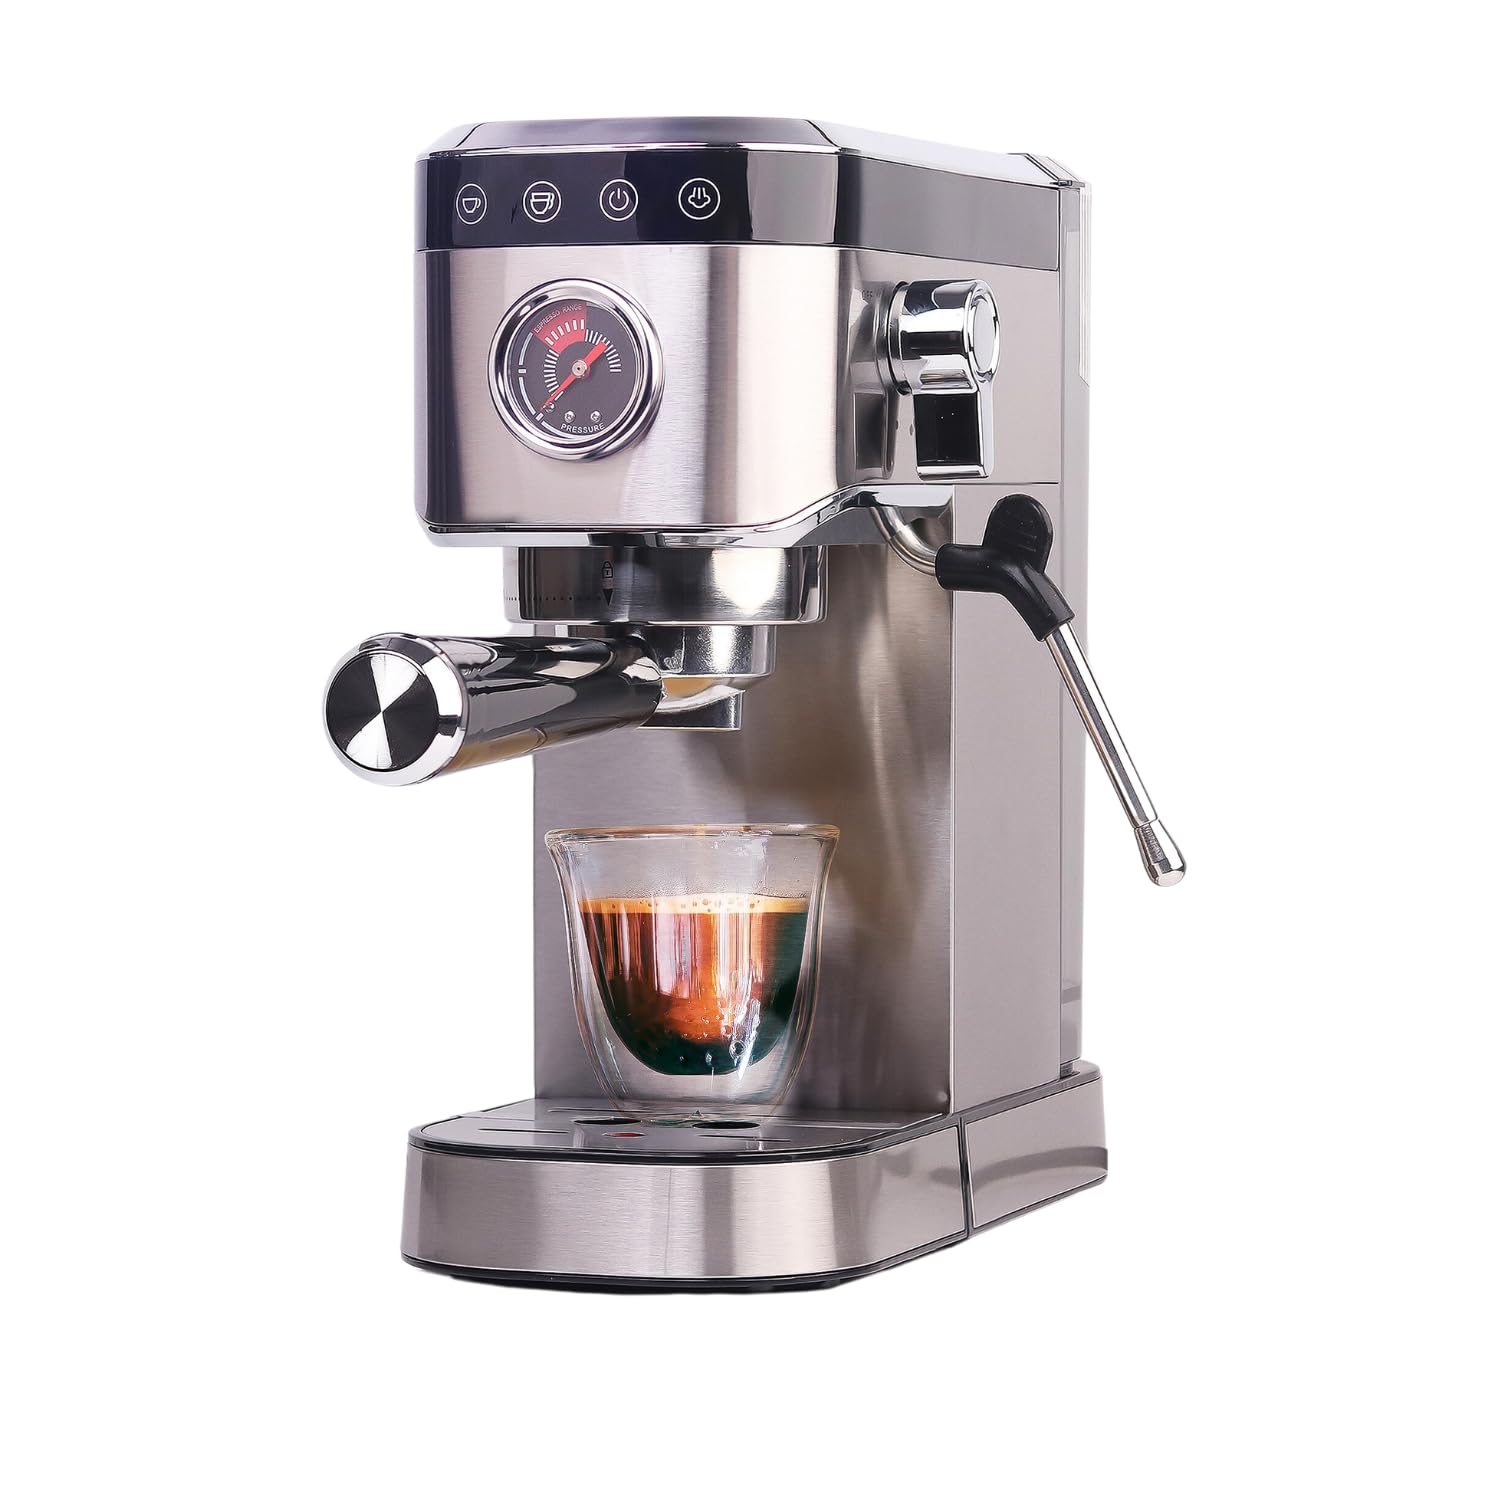 How To Use InstaCuppa Travel Frother? 